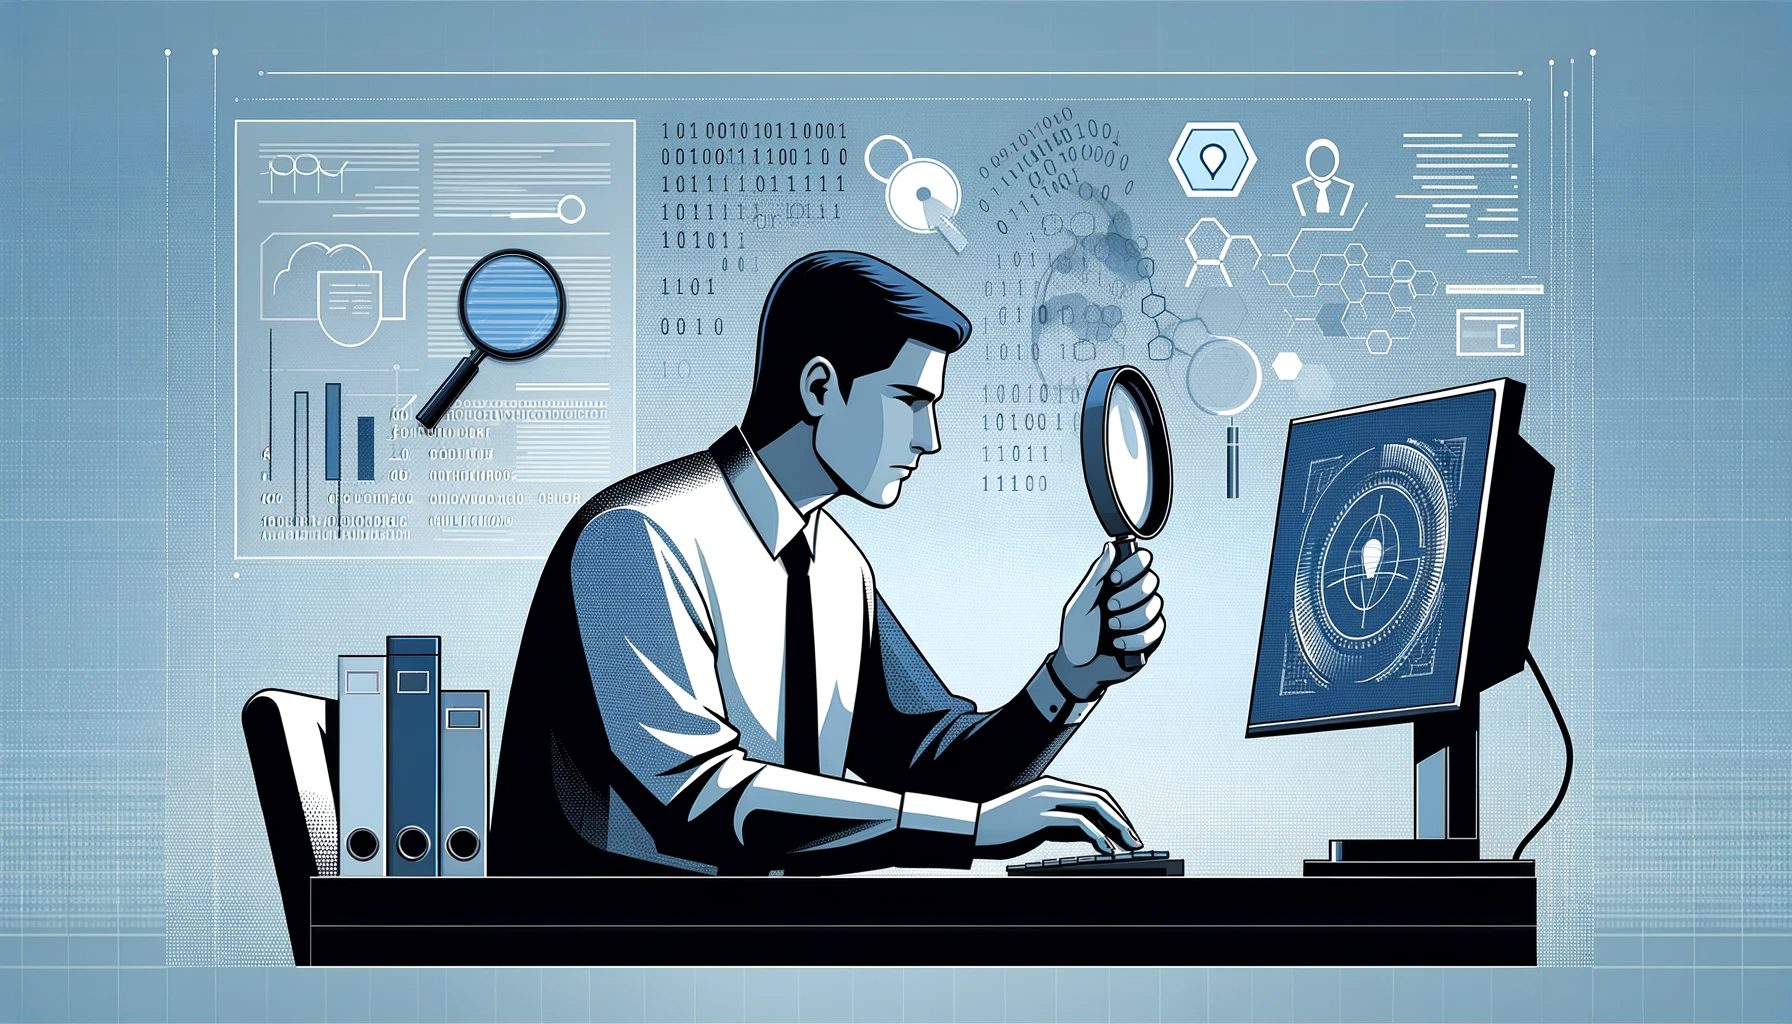 A simple image of a forensic investigation engineer identifying the cause of an incident. The image should depict an engineer in a professional setting, engaged in analyzing data on a computer screen, with digital forensic tools and symbols such as magnifying glass, binary code, and digital graphs. The engineer appears focused and meticulous. The background is minimalistic, emphasizing the concentration and seriousness of the task. The color scheme should be subtle, using shades of blue, grey, and white to convey a technological and analytical atmosphere.